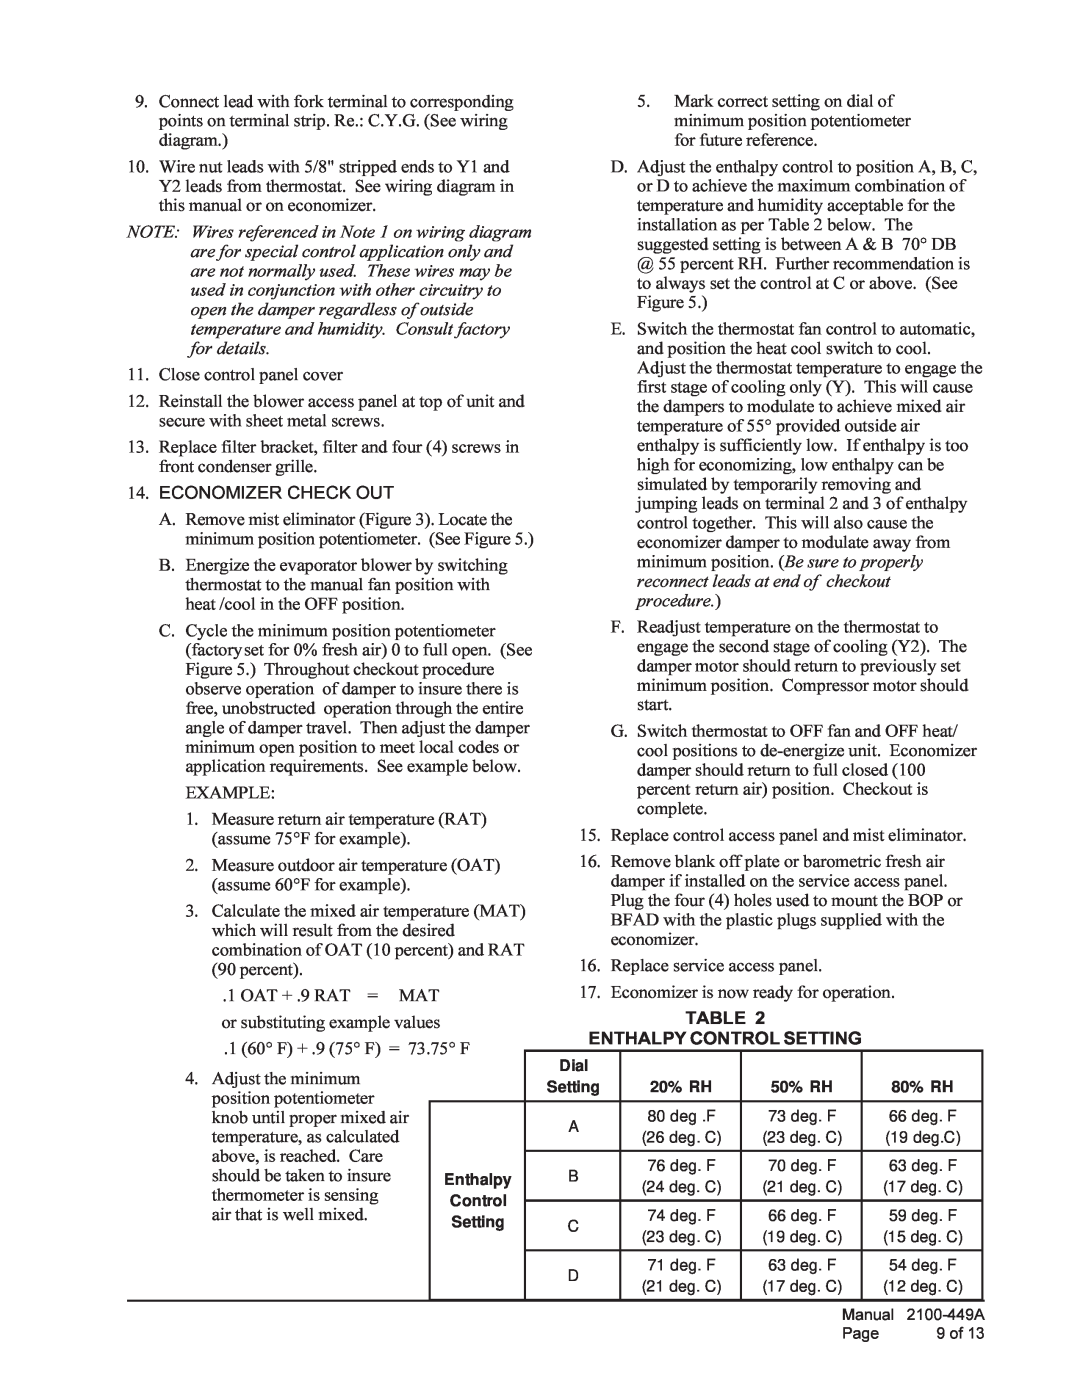 Bard EIFM-3C installation instructions Economizer Check Out, Enthalpy Control Setting 